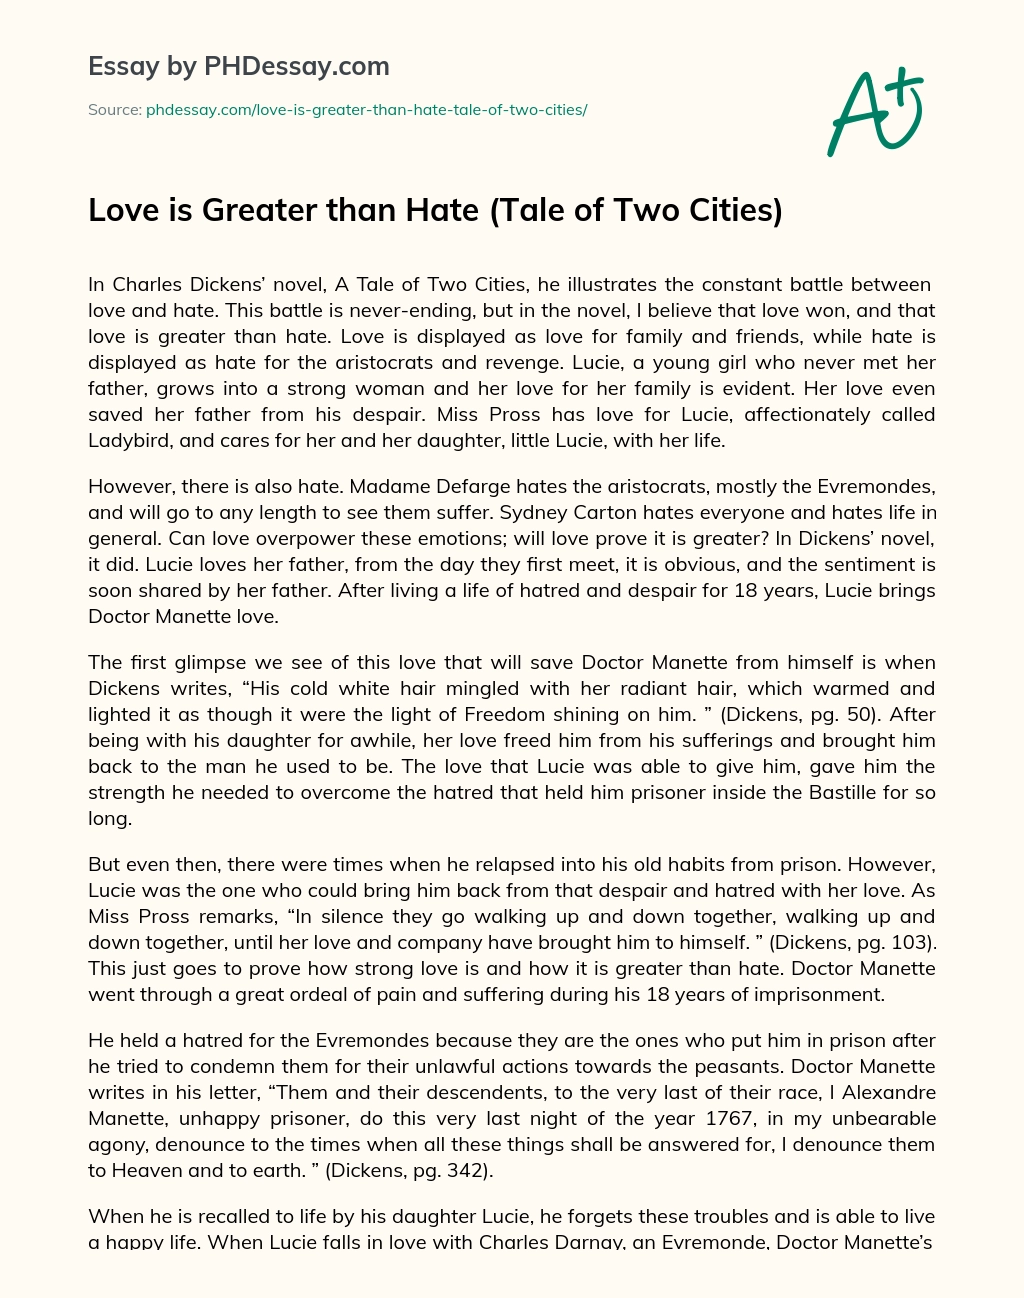 Love is Greater than Hate (Tale of Two Cities) essay